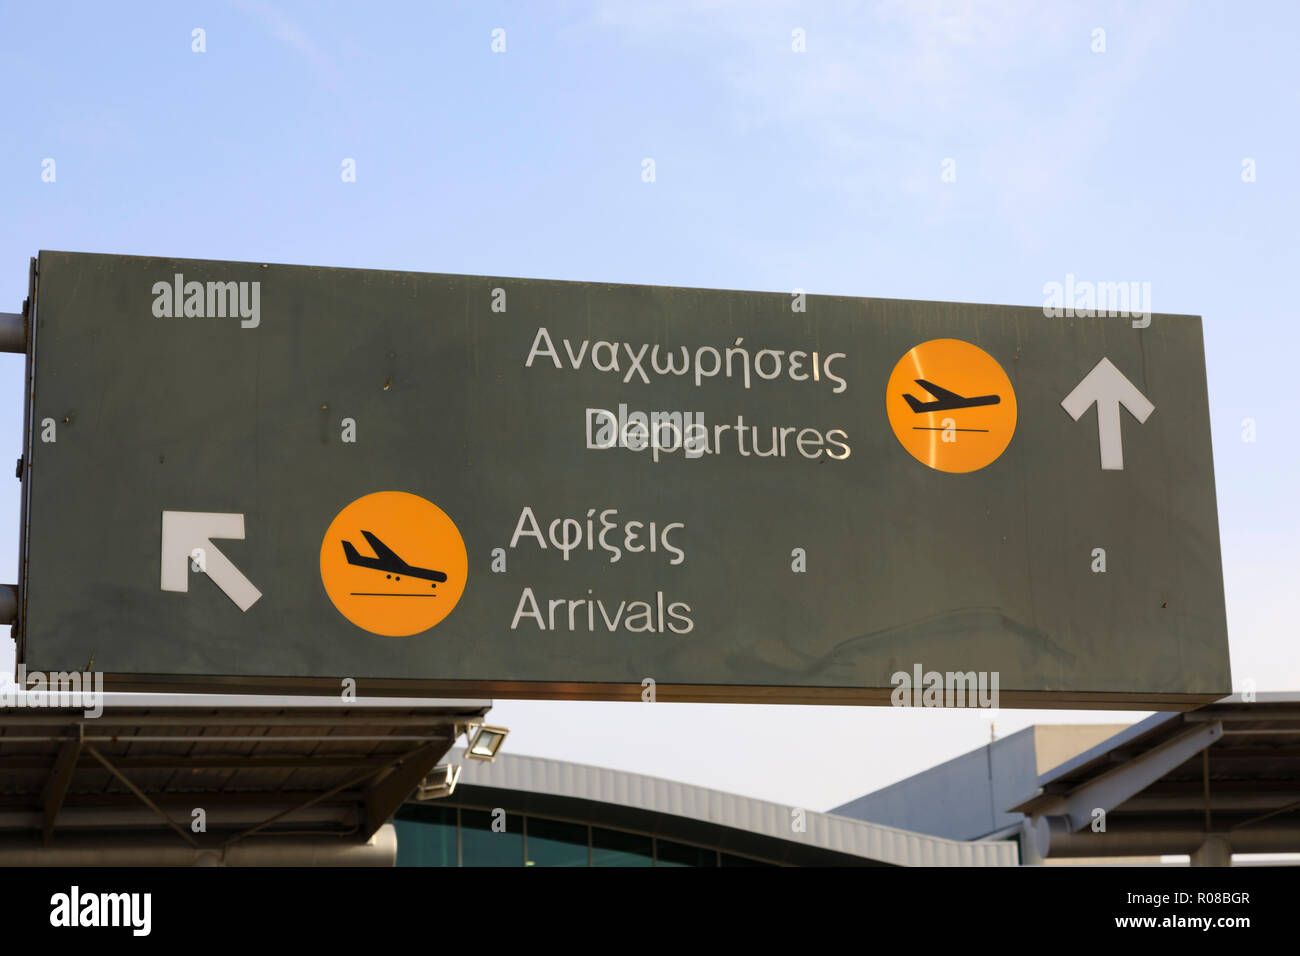 Arrivals and departures sign in English and Greek, Glafcos Clerides international airport, Larnaca,Cyprus October 2018 Stock Photo